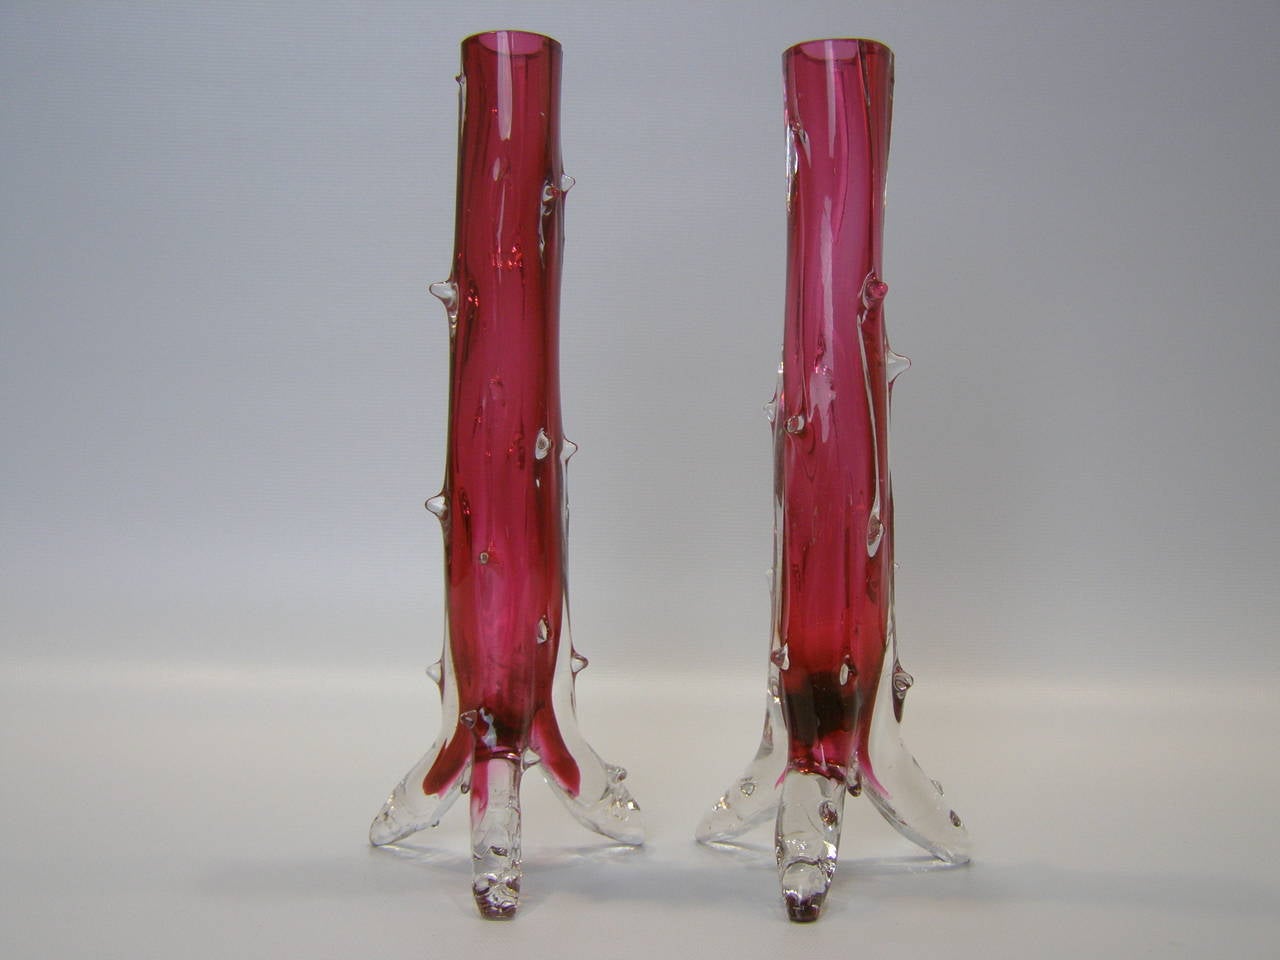 Lovely pair of hand blown bud vases designed to look like cactus's. Cranberry colored glass with clear glass casing and tripod legs. Sold as a pair.
The measurements below show the diameter of the stems; the width including the tripod legs is 3